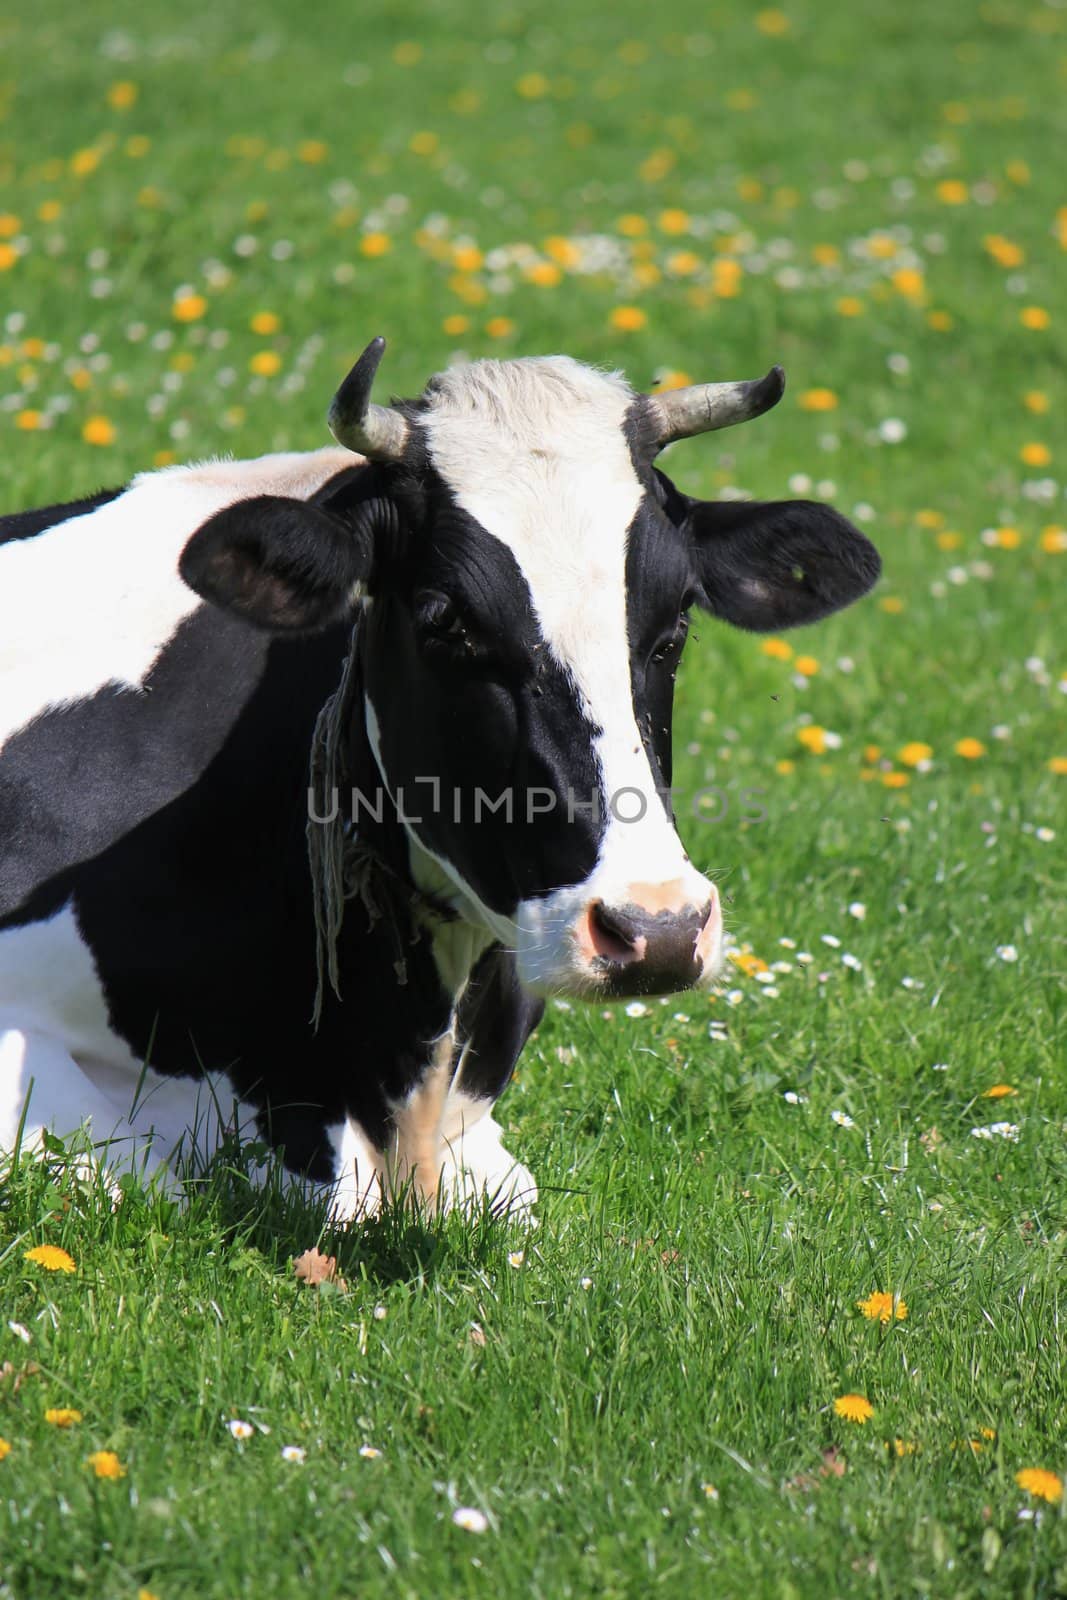 Cow of Fribourg canton, Switzerland, by Elenaphotos21